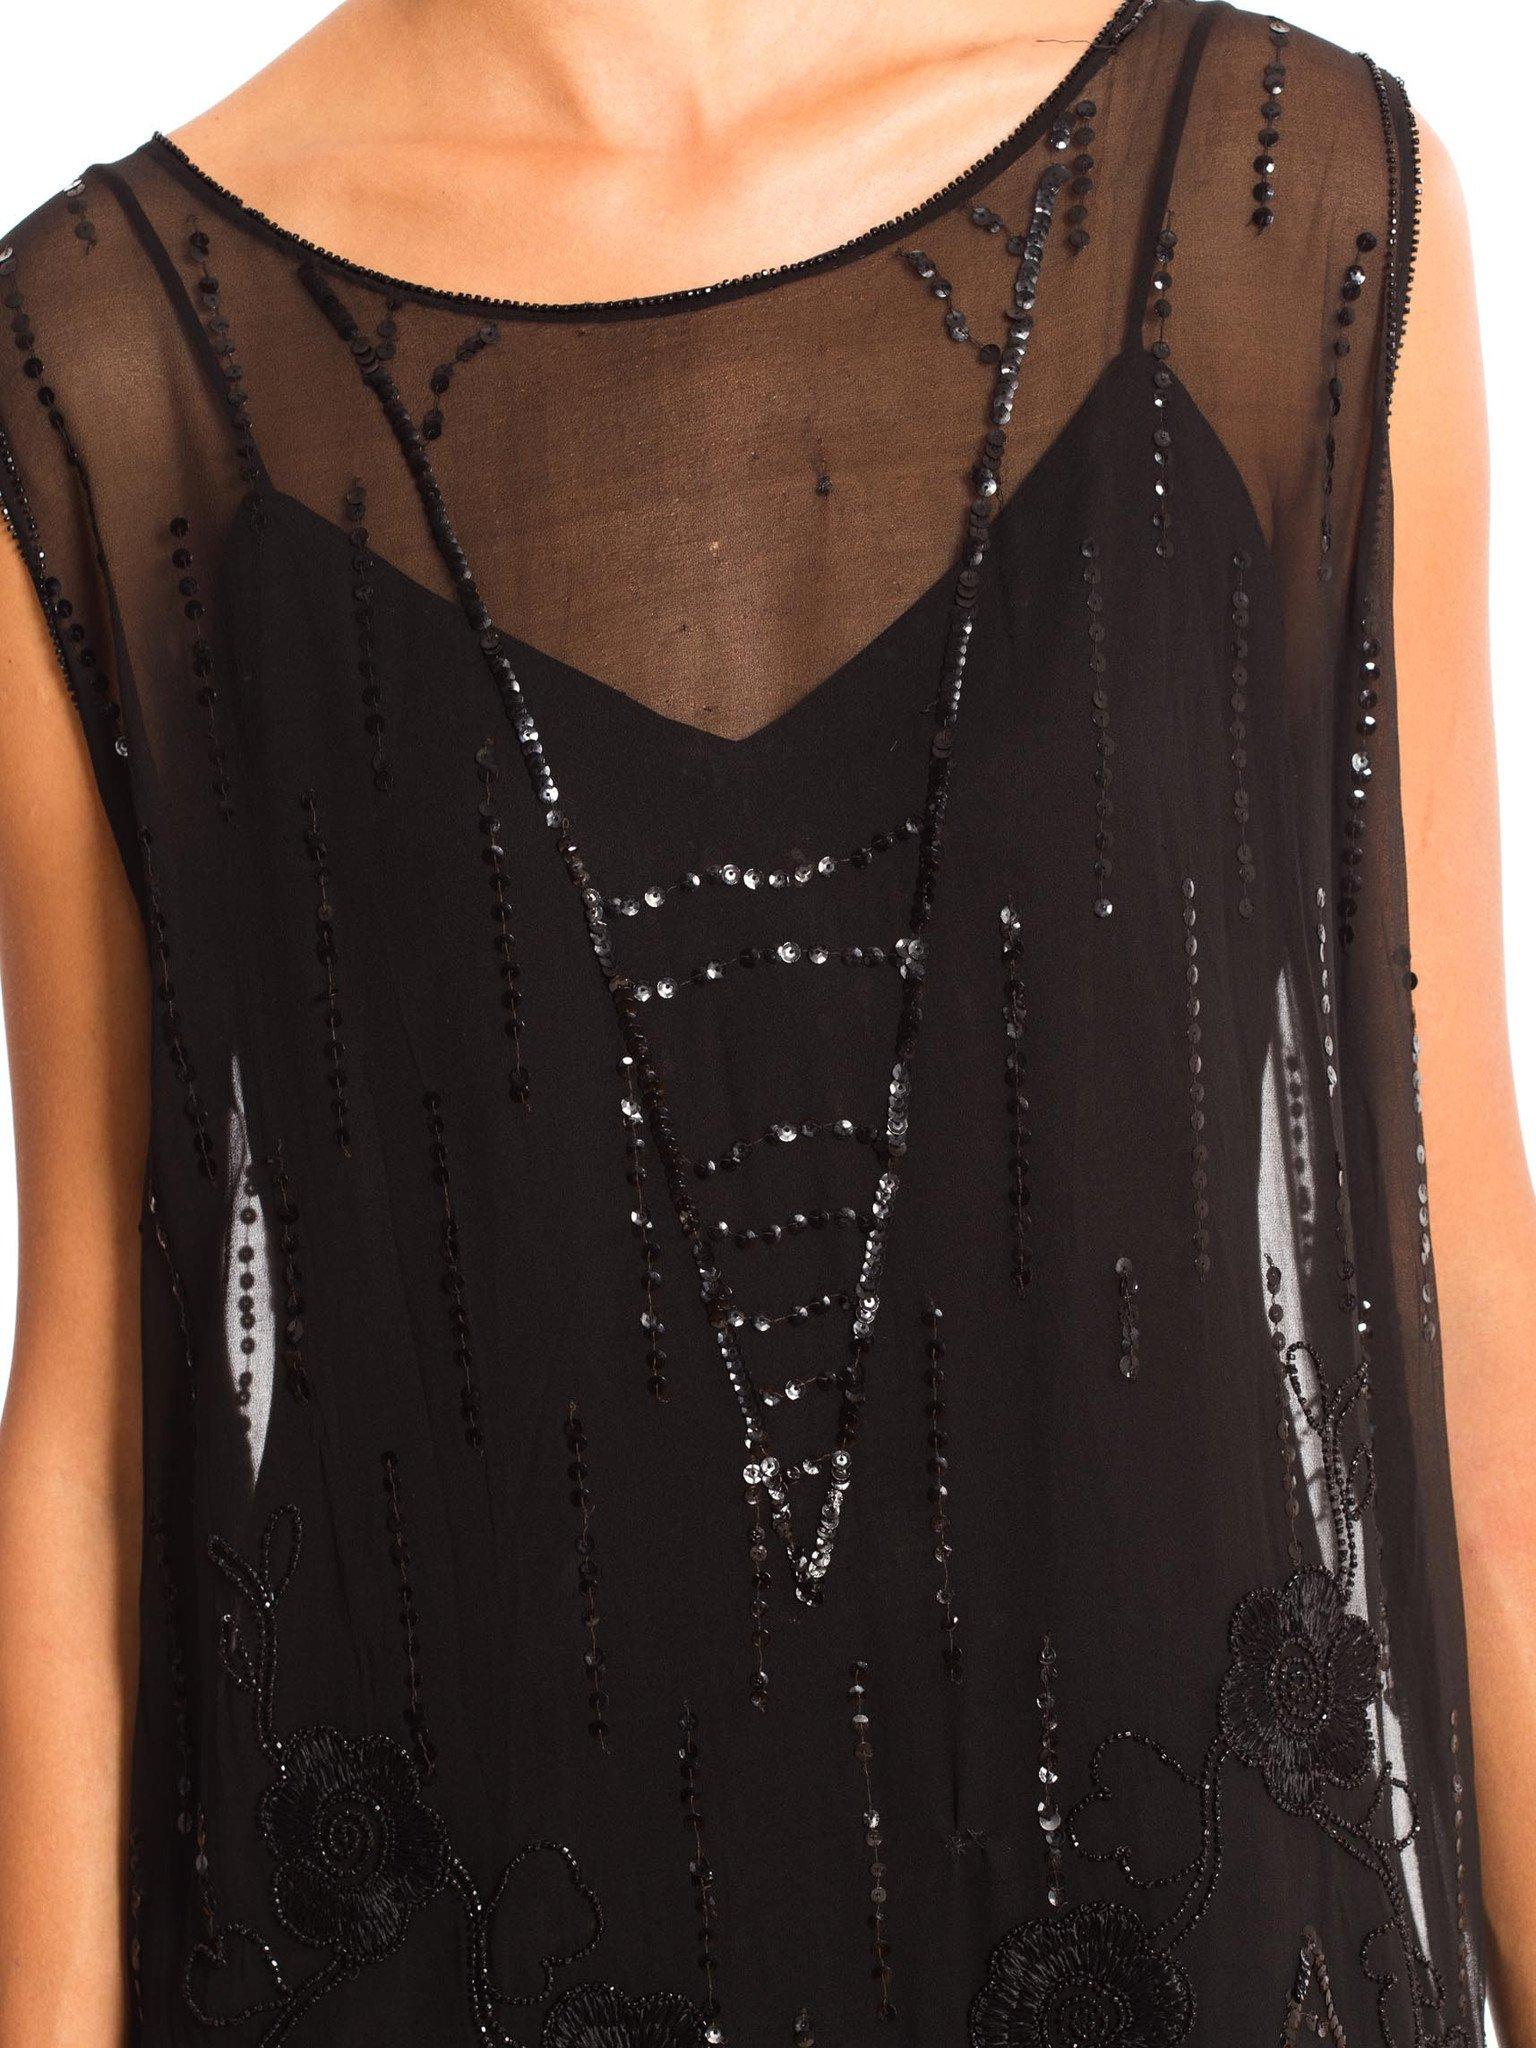 1920'S Black Silk Chiffon Sheer  Cocktail Dress With Floral Deco Sequins, Beads 3